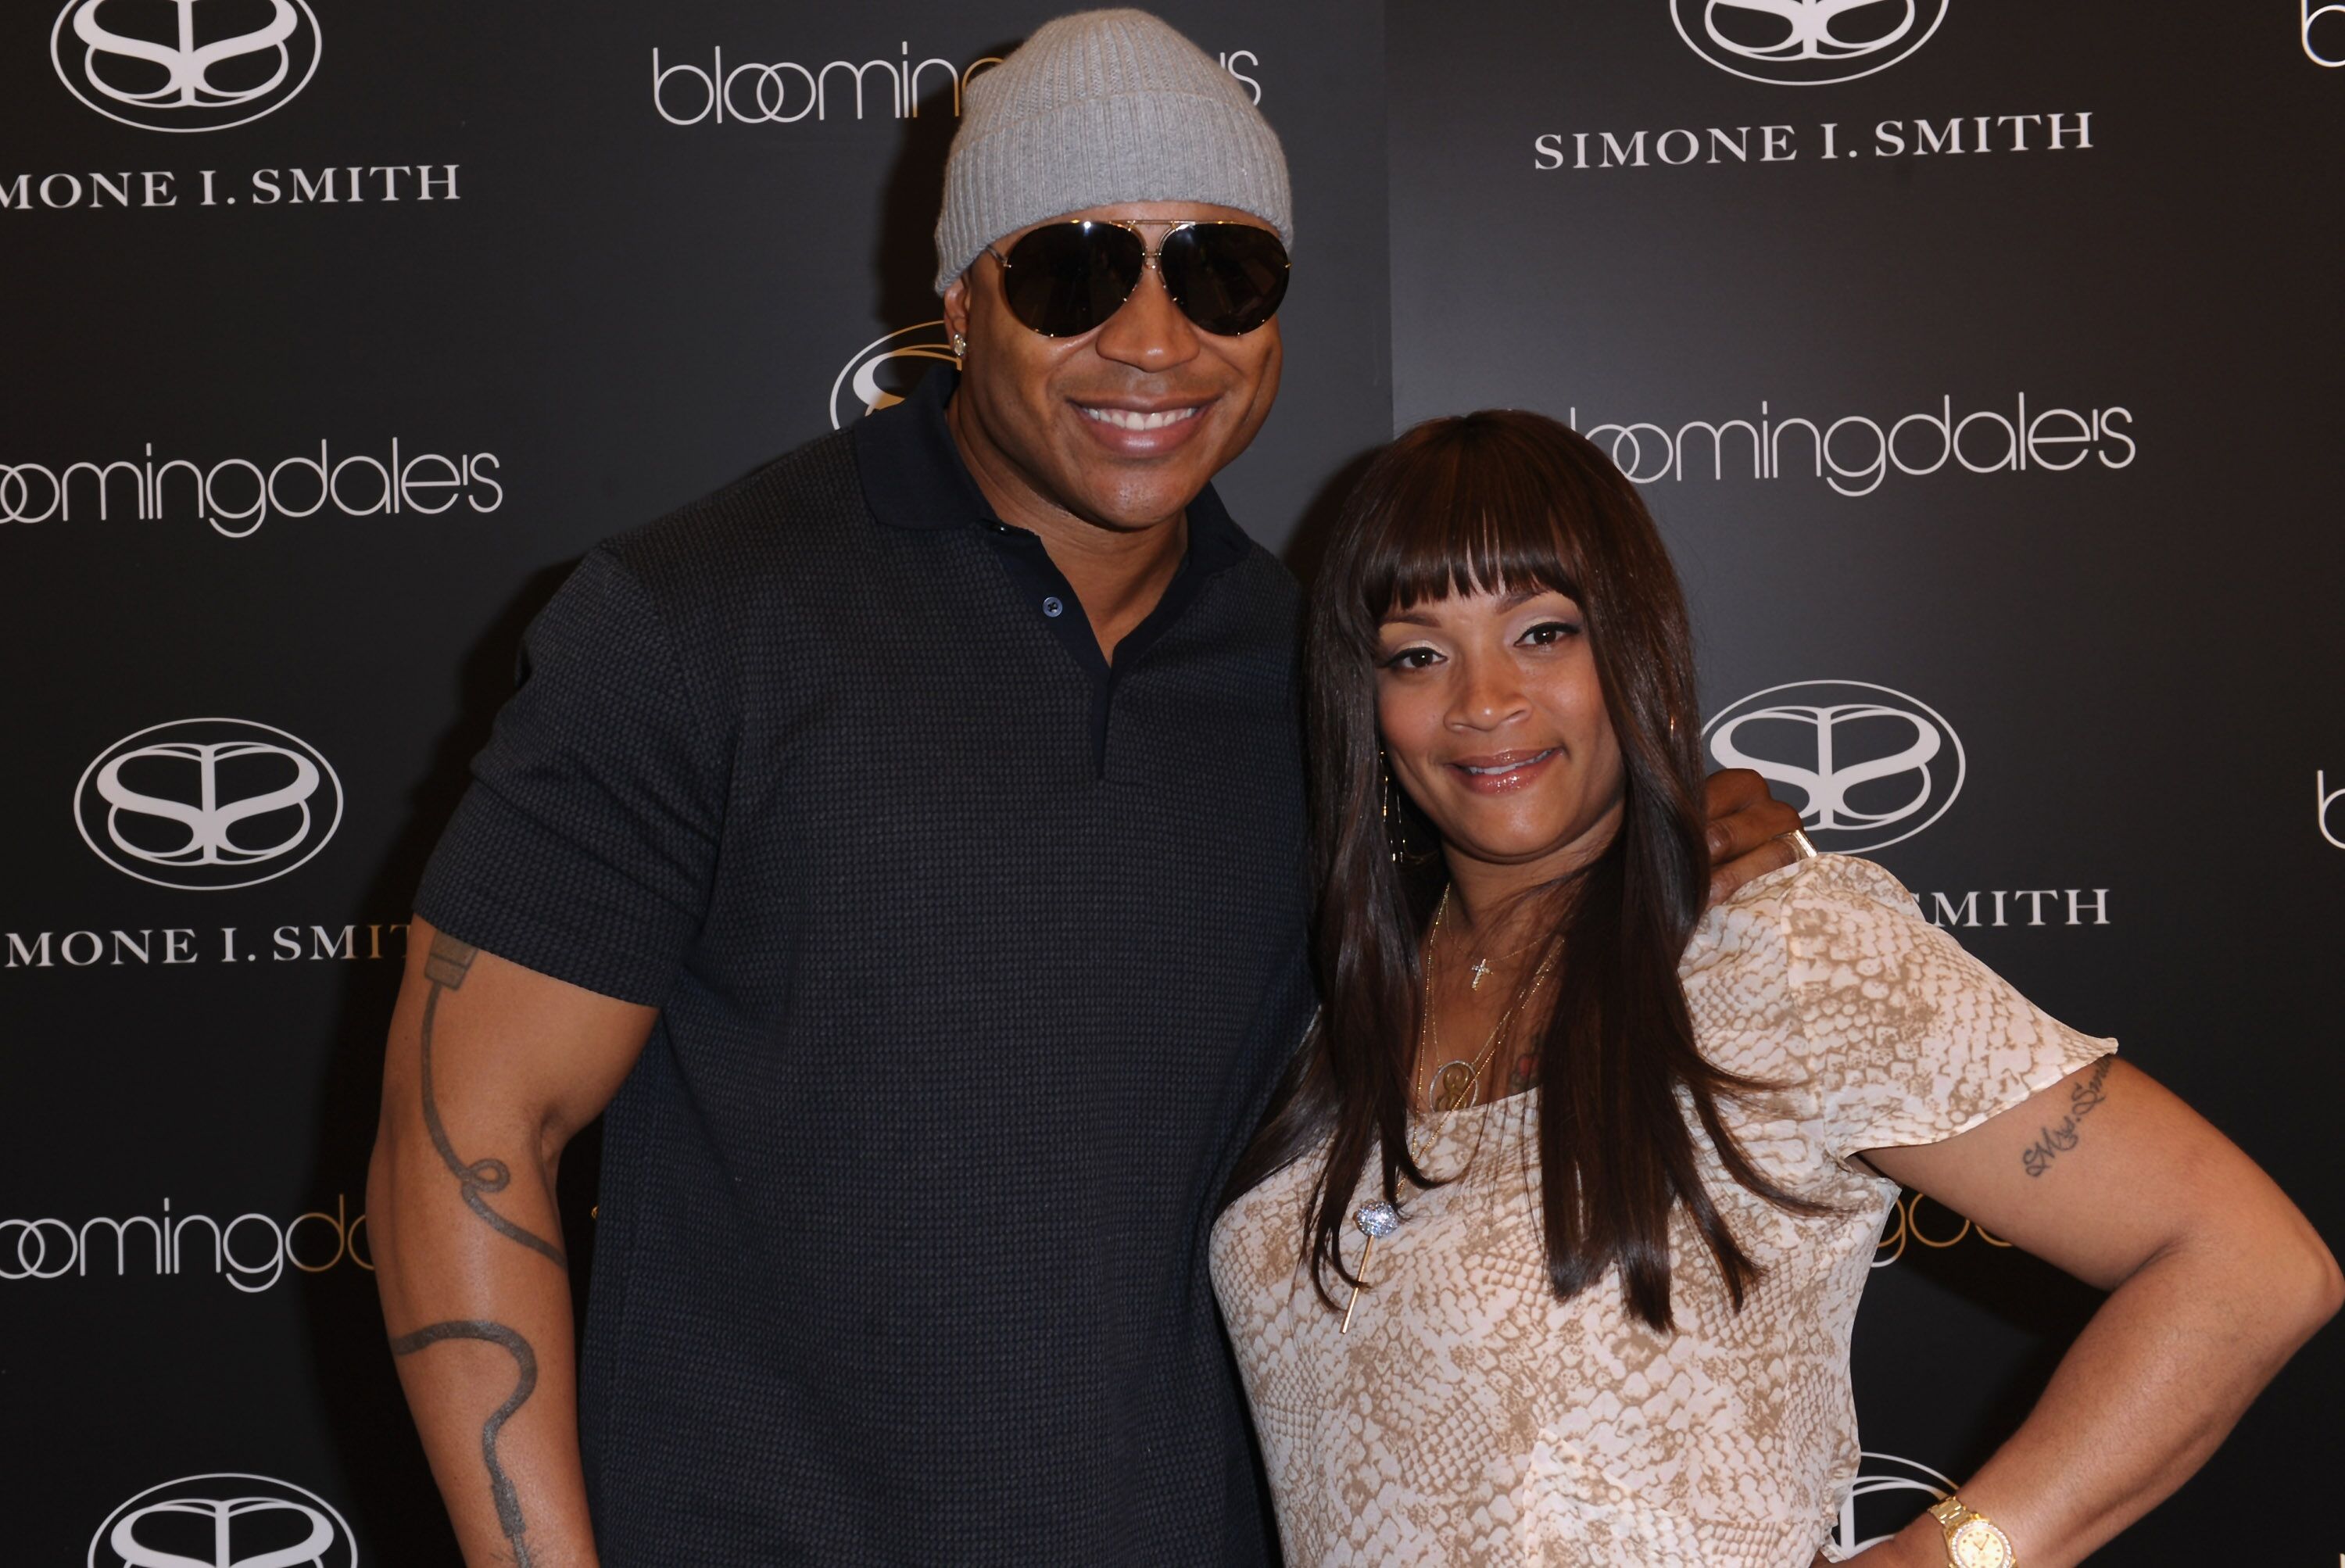 Actor LL Cool J and designer Simone I. Smith attend a personal appearance by Simone I. Smith at Bloomingdale's on May 12, 2011 in Century City, California. | Photo: Getty Images